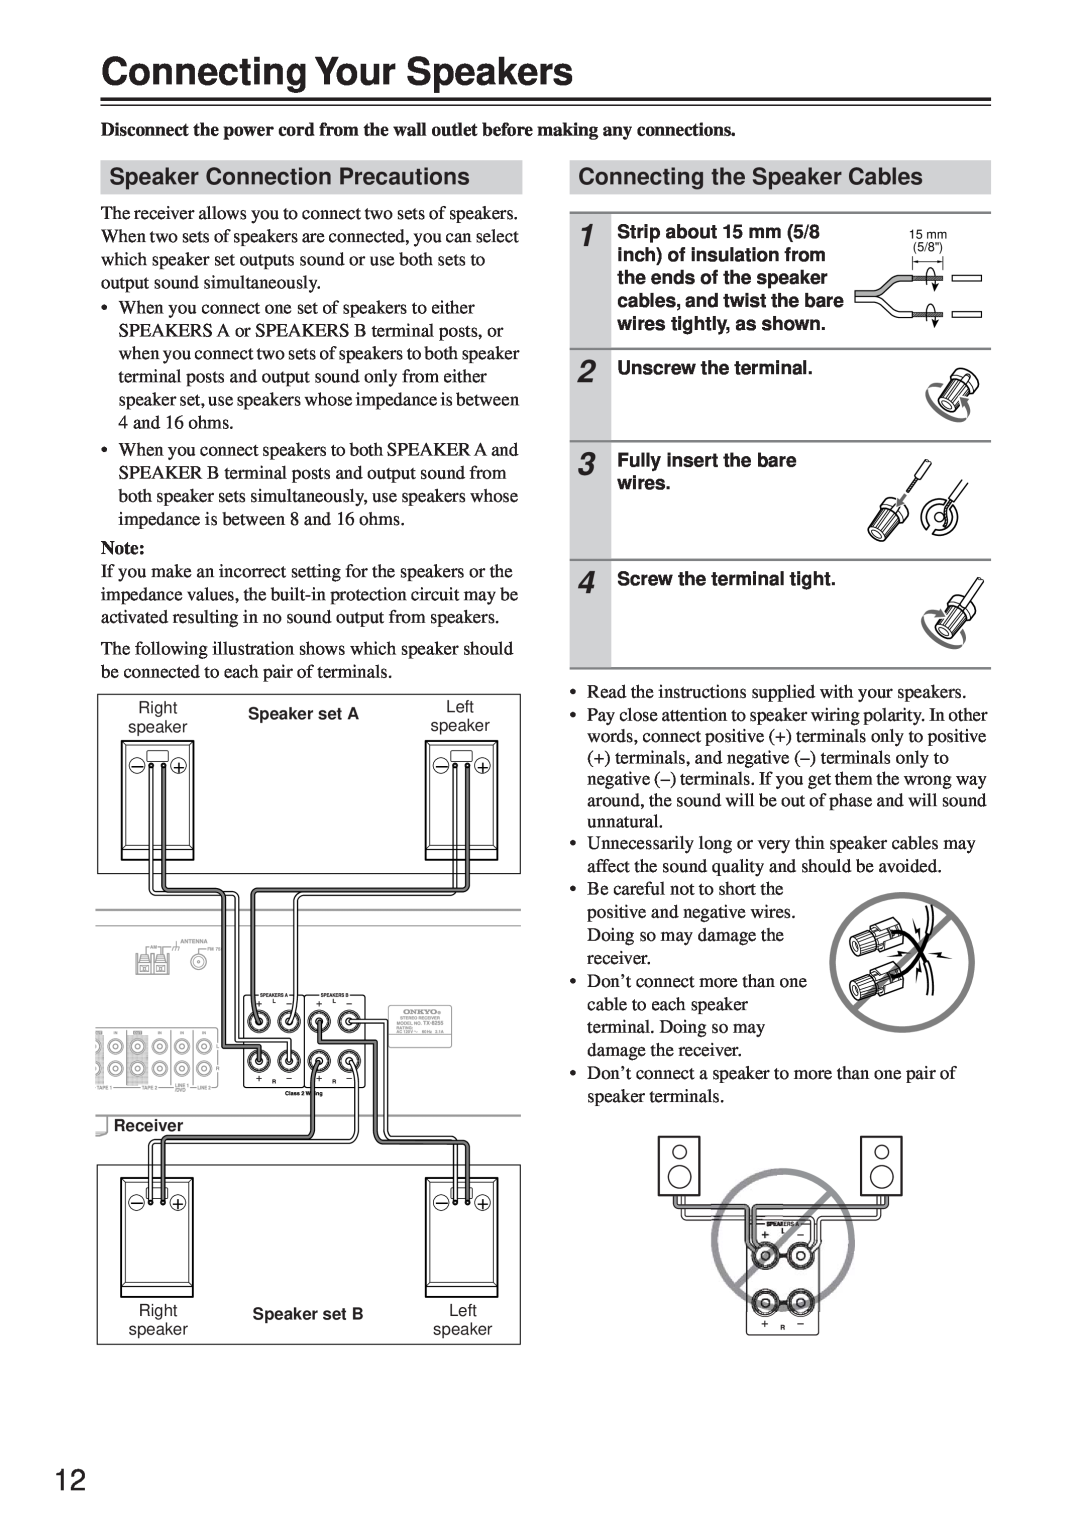 Onkyo TX-8255 instruction manual Connecting Your Speakers, Speaker Connection Precautions, Connecting the Speaker Cables 